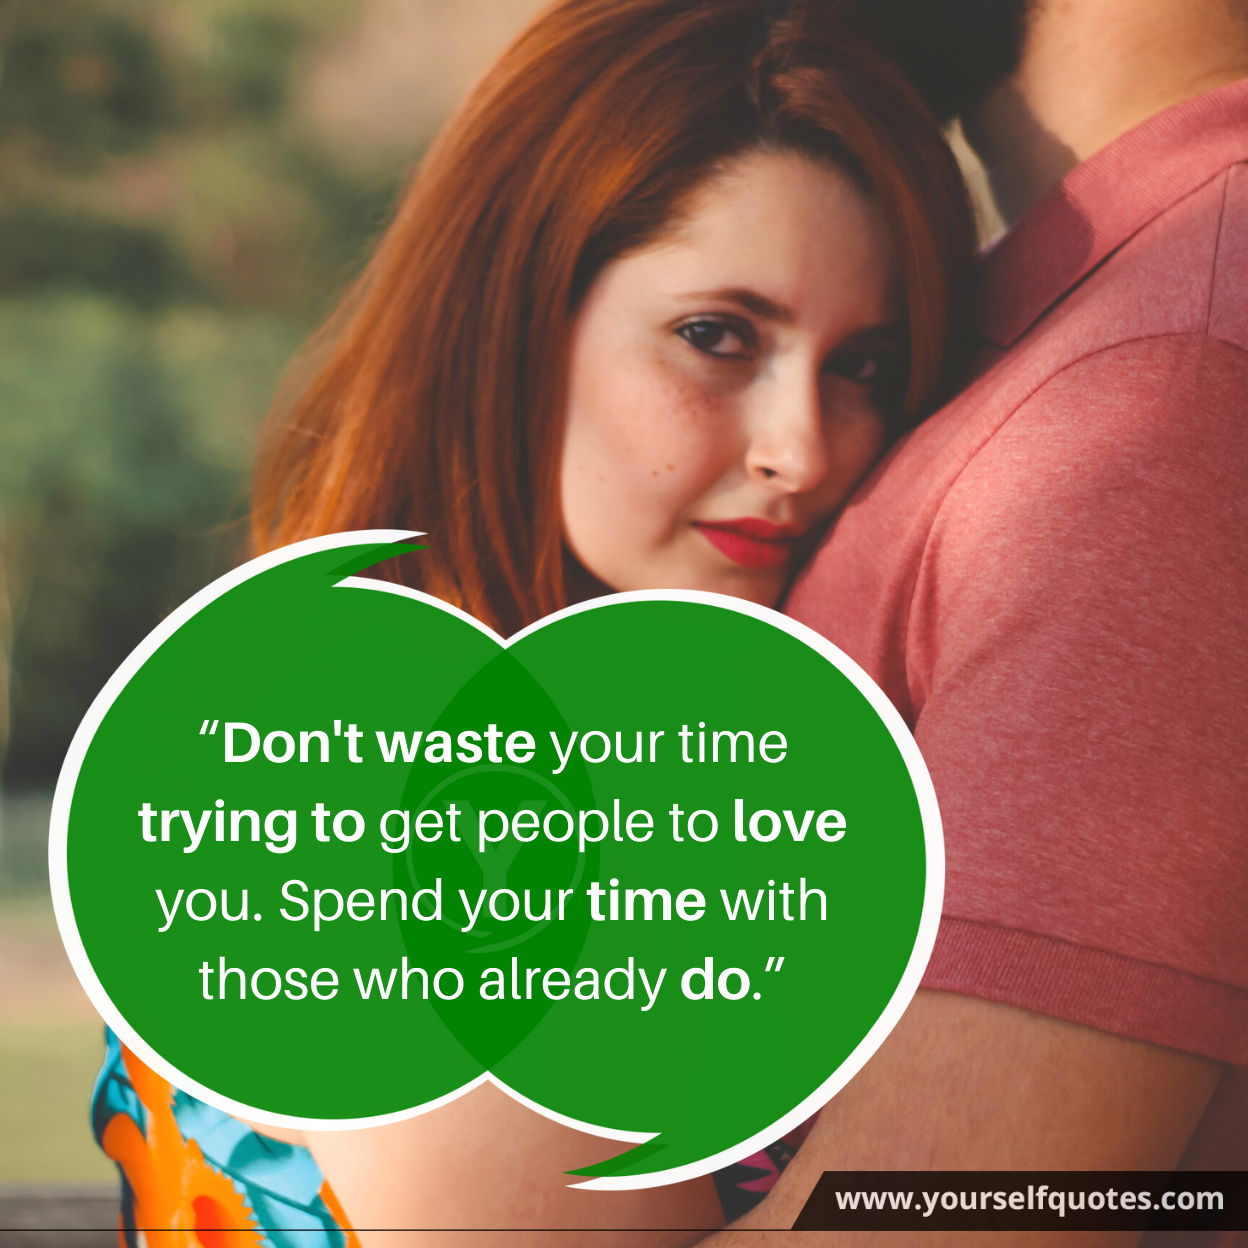 Best Quotes on Love Wallpaper